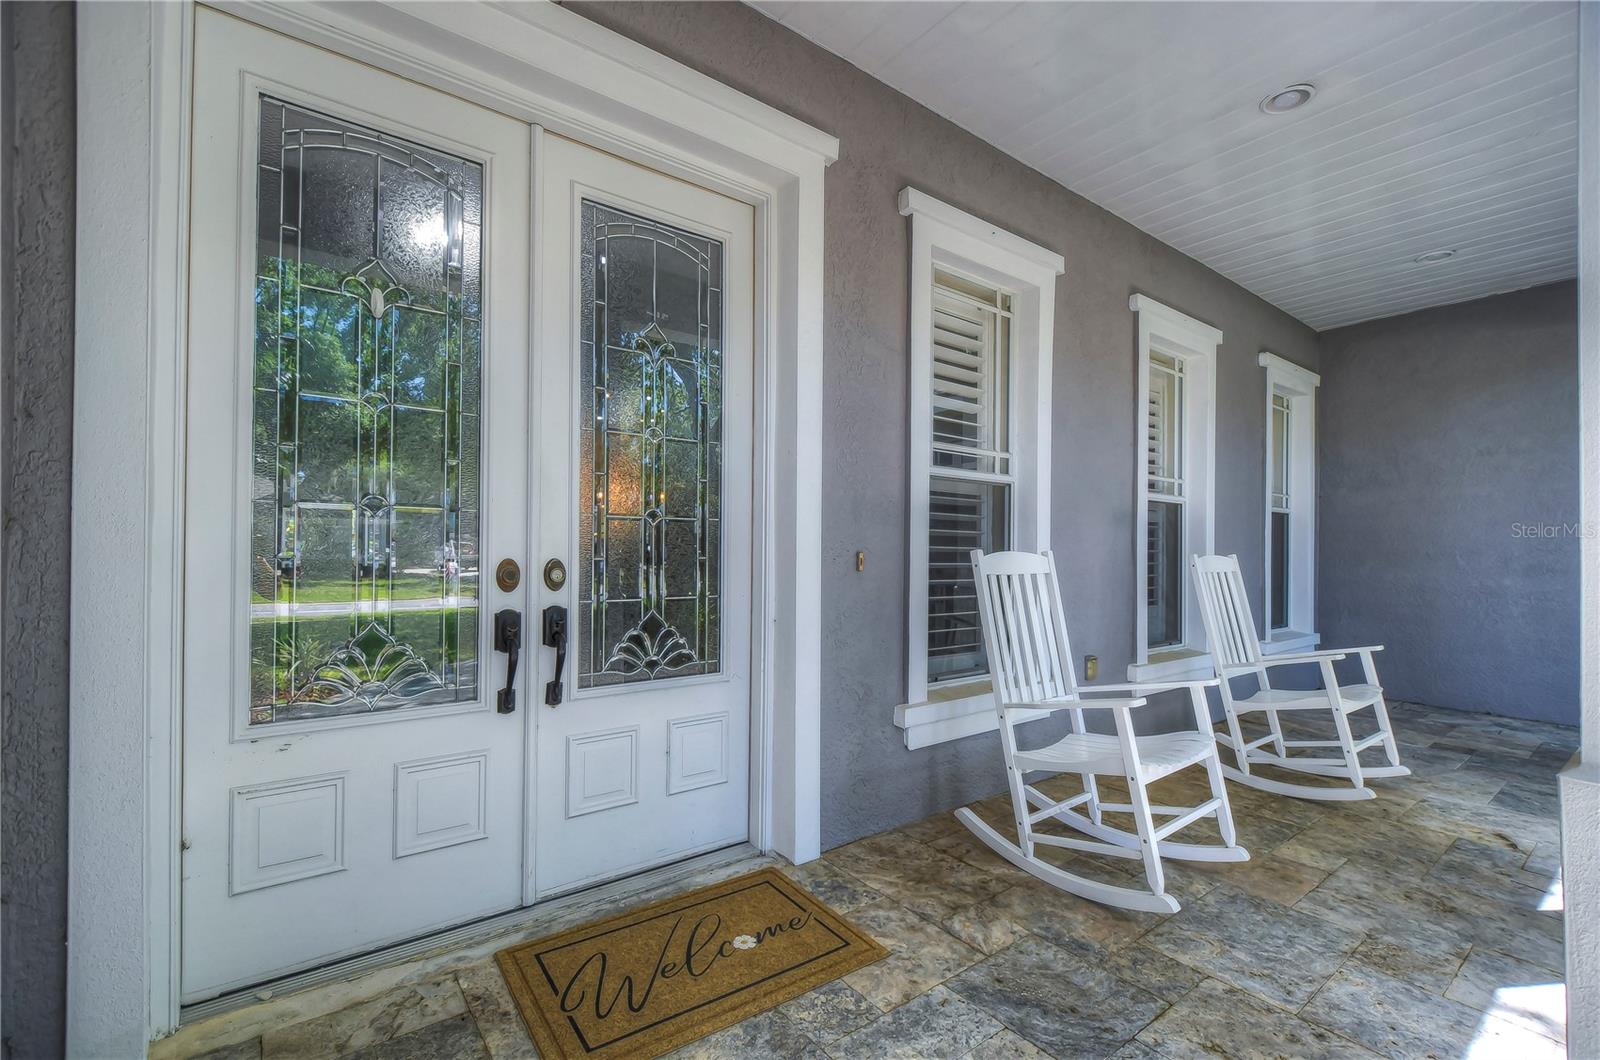 Welcoming front porch!